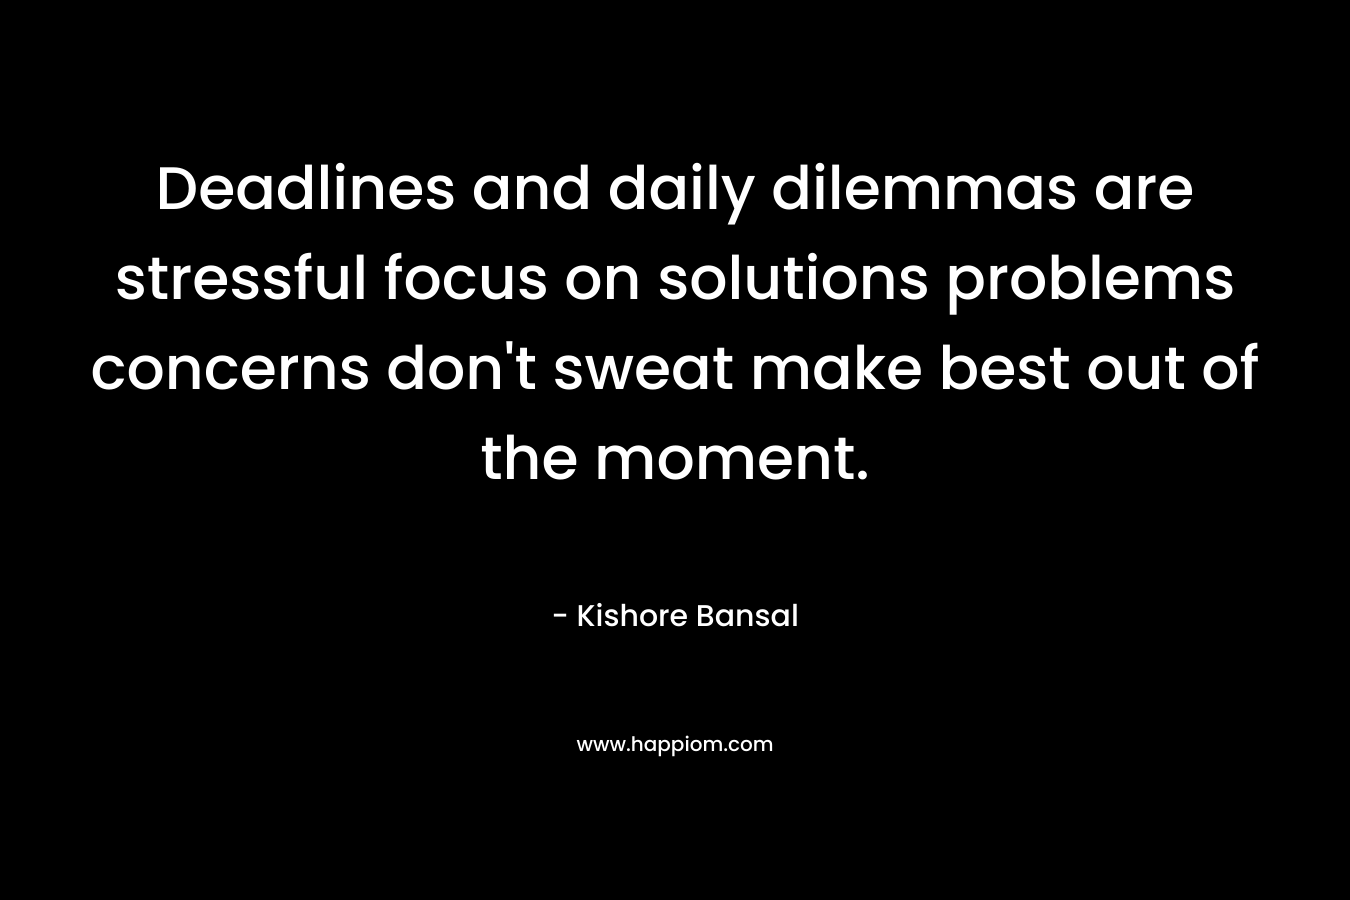 Deadlines and daily dilemmas are stressful focus on solutions problems concerns don’t sweat make best out of the moment. – Kishore Bansal